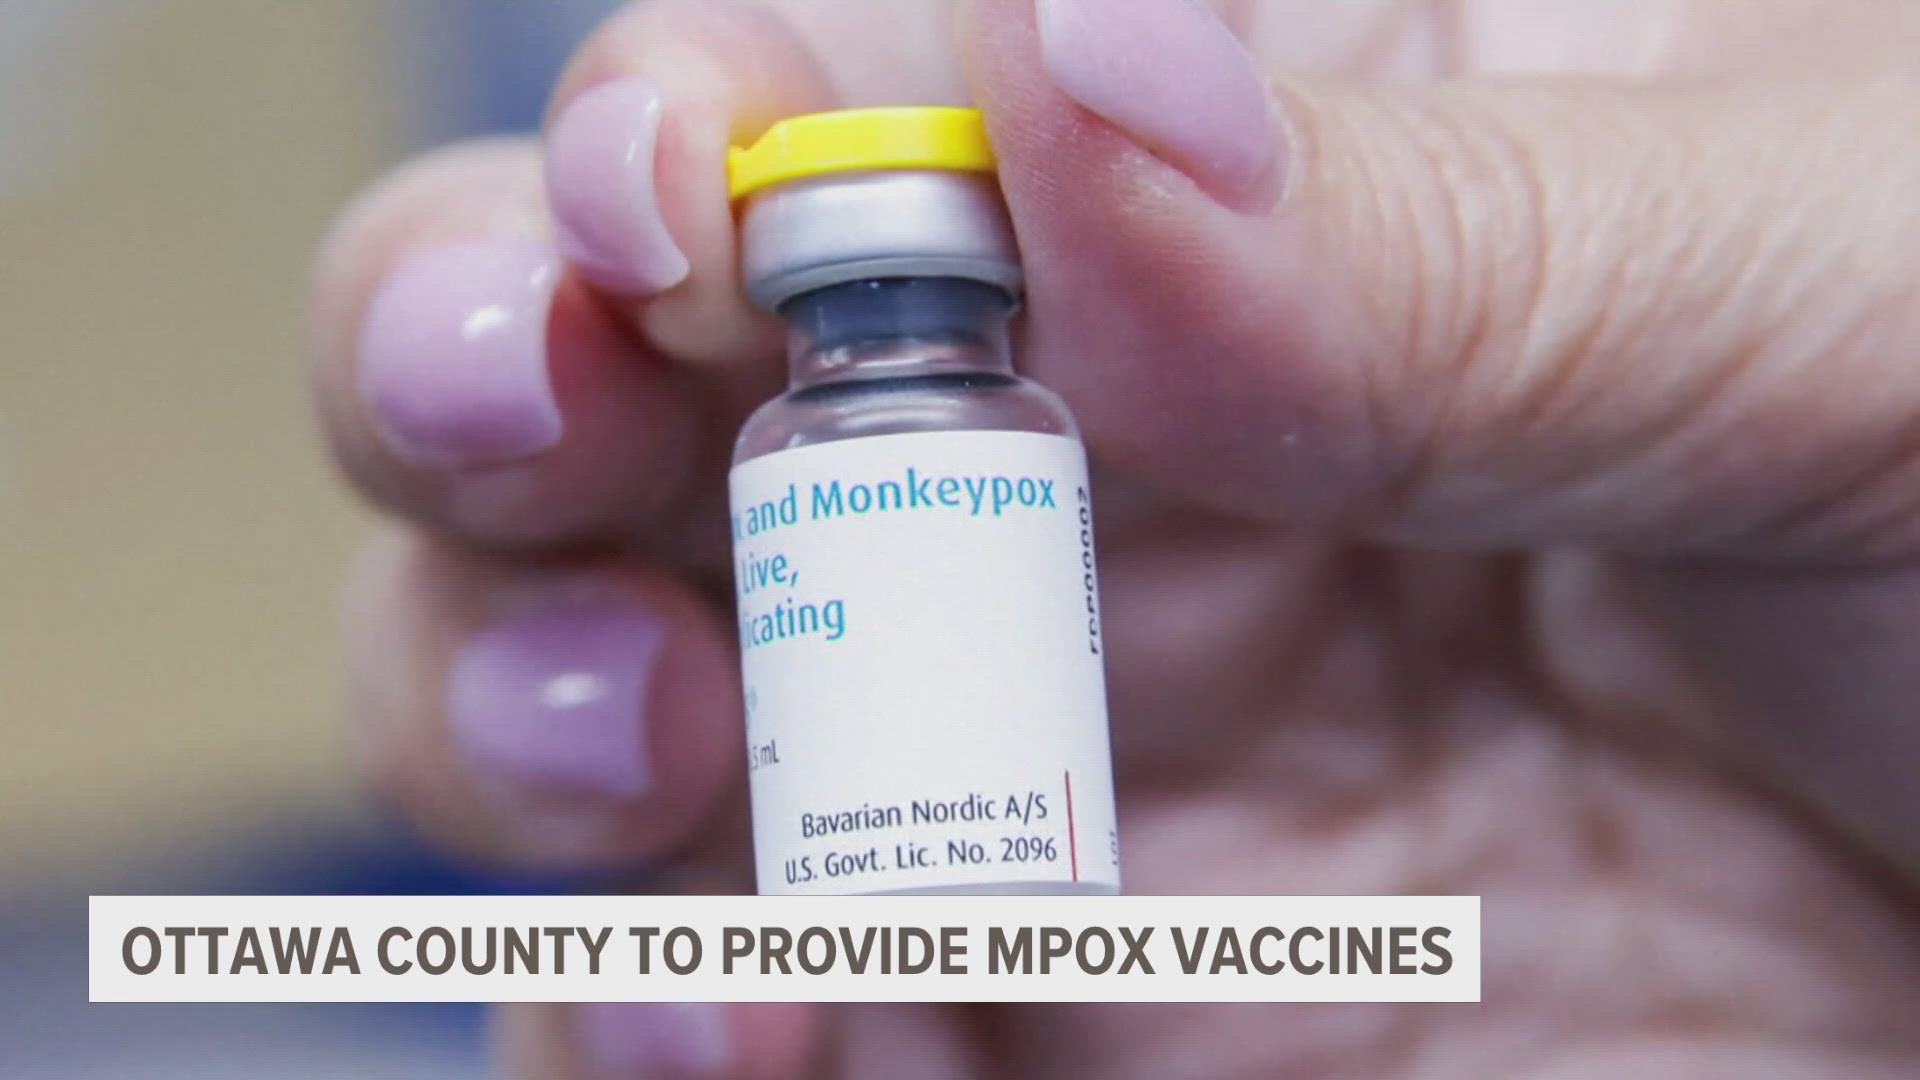 The decision to provide the vaccines comes as Chicago has seen an increase in mpox cases in recent weeks.